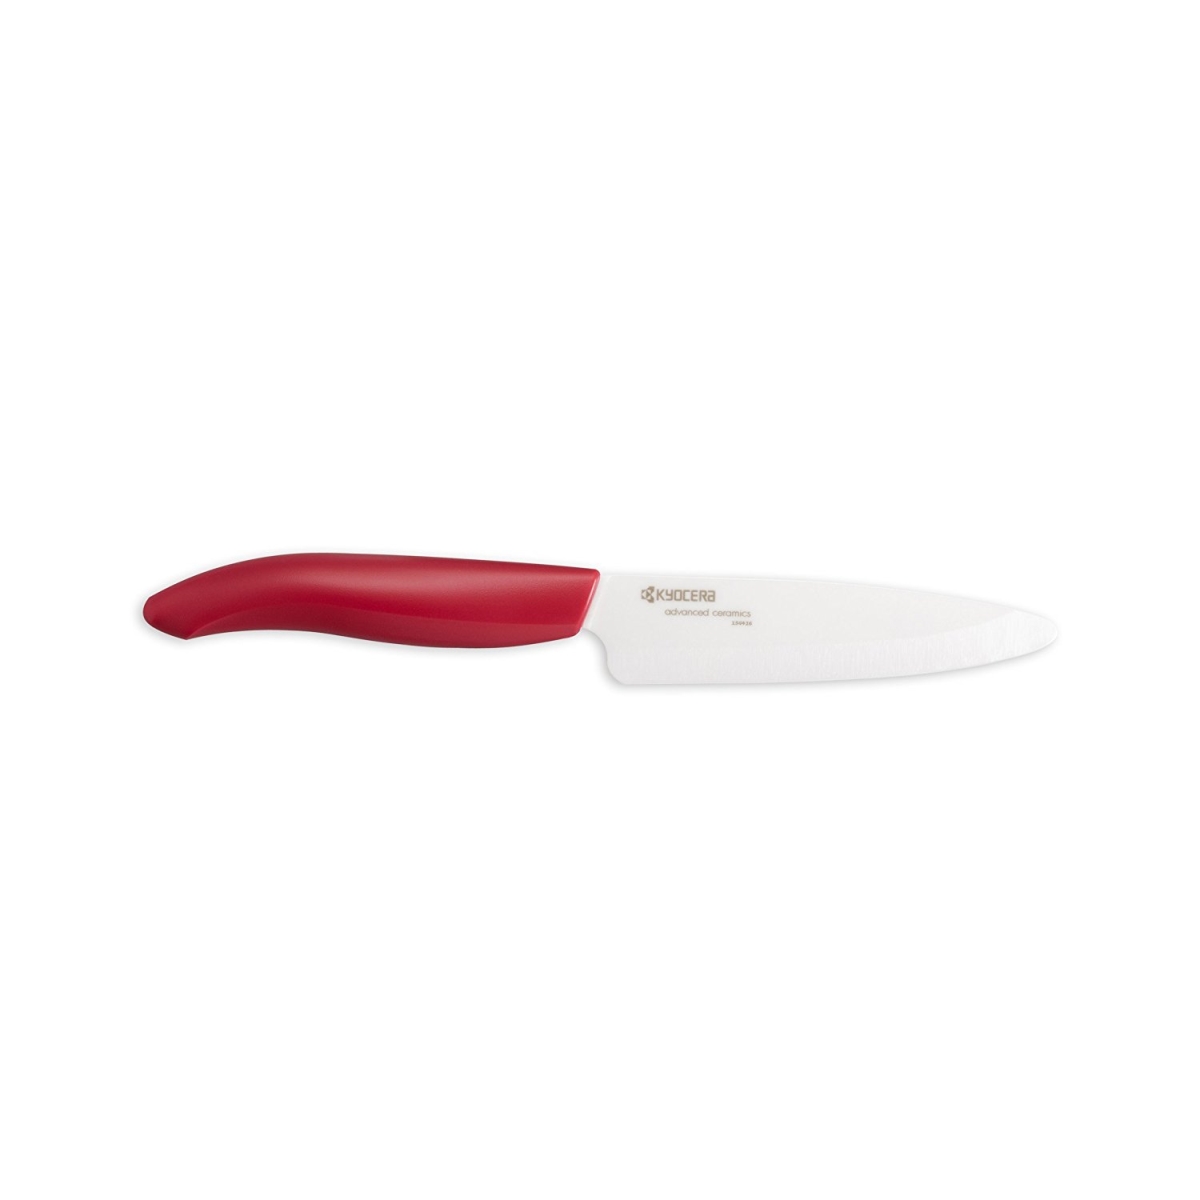 Fk110whrd 4.5 In. Advanced Ceramic Revolution Series Utility Knife, Red Handle With White Blade